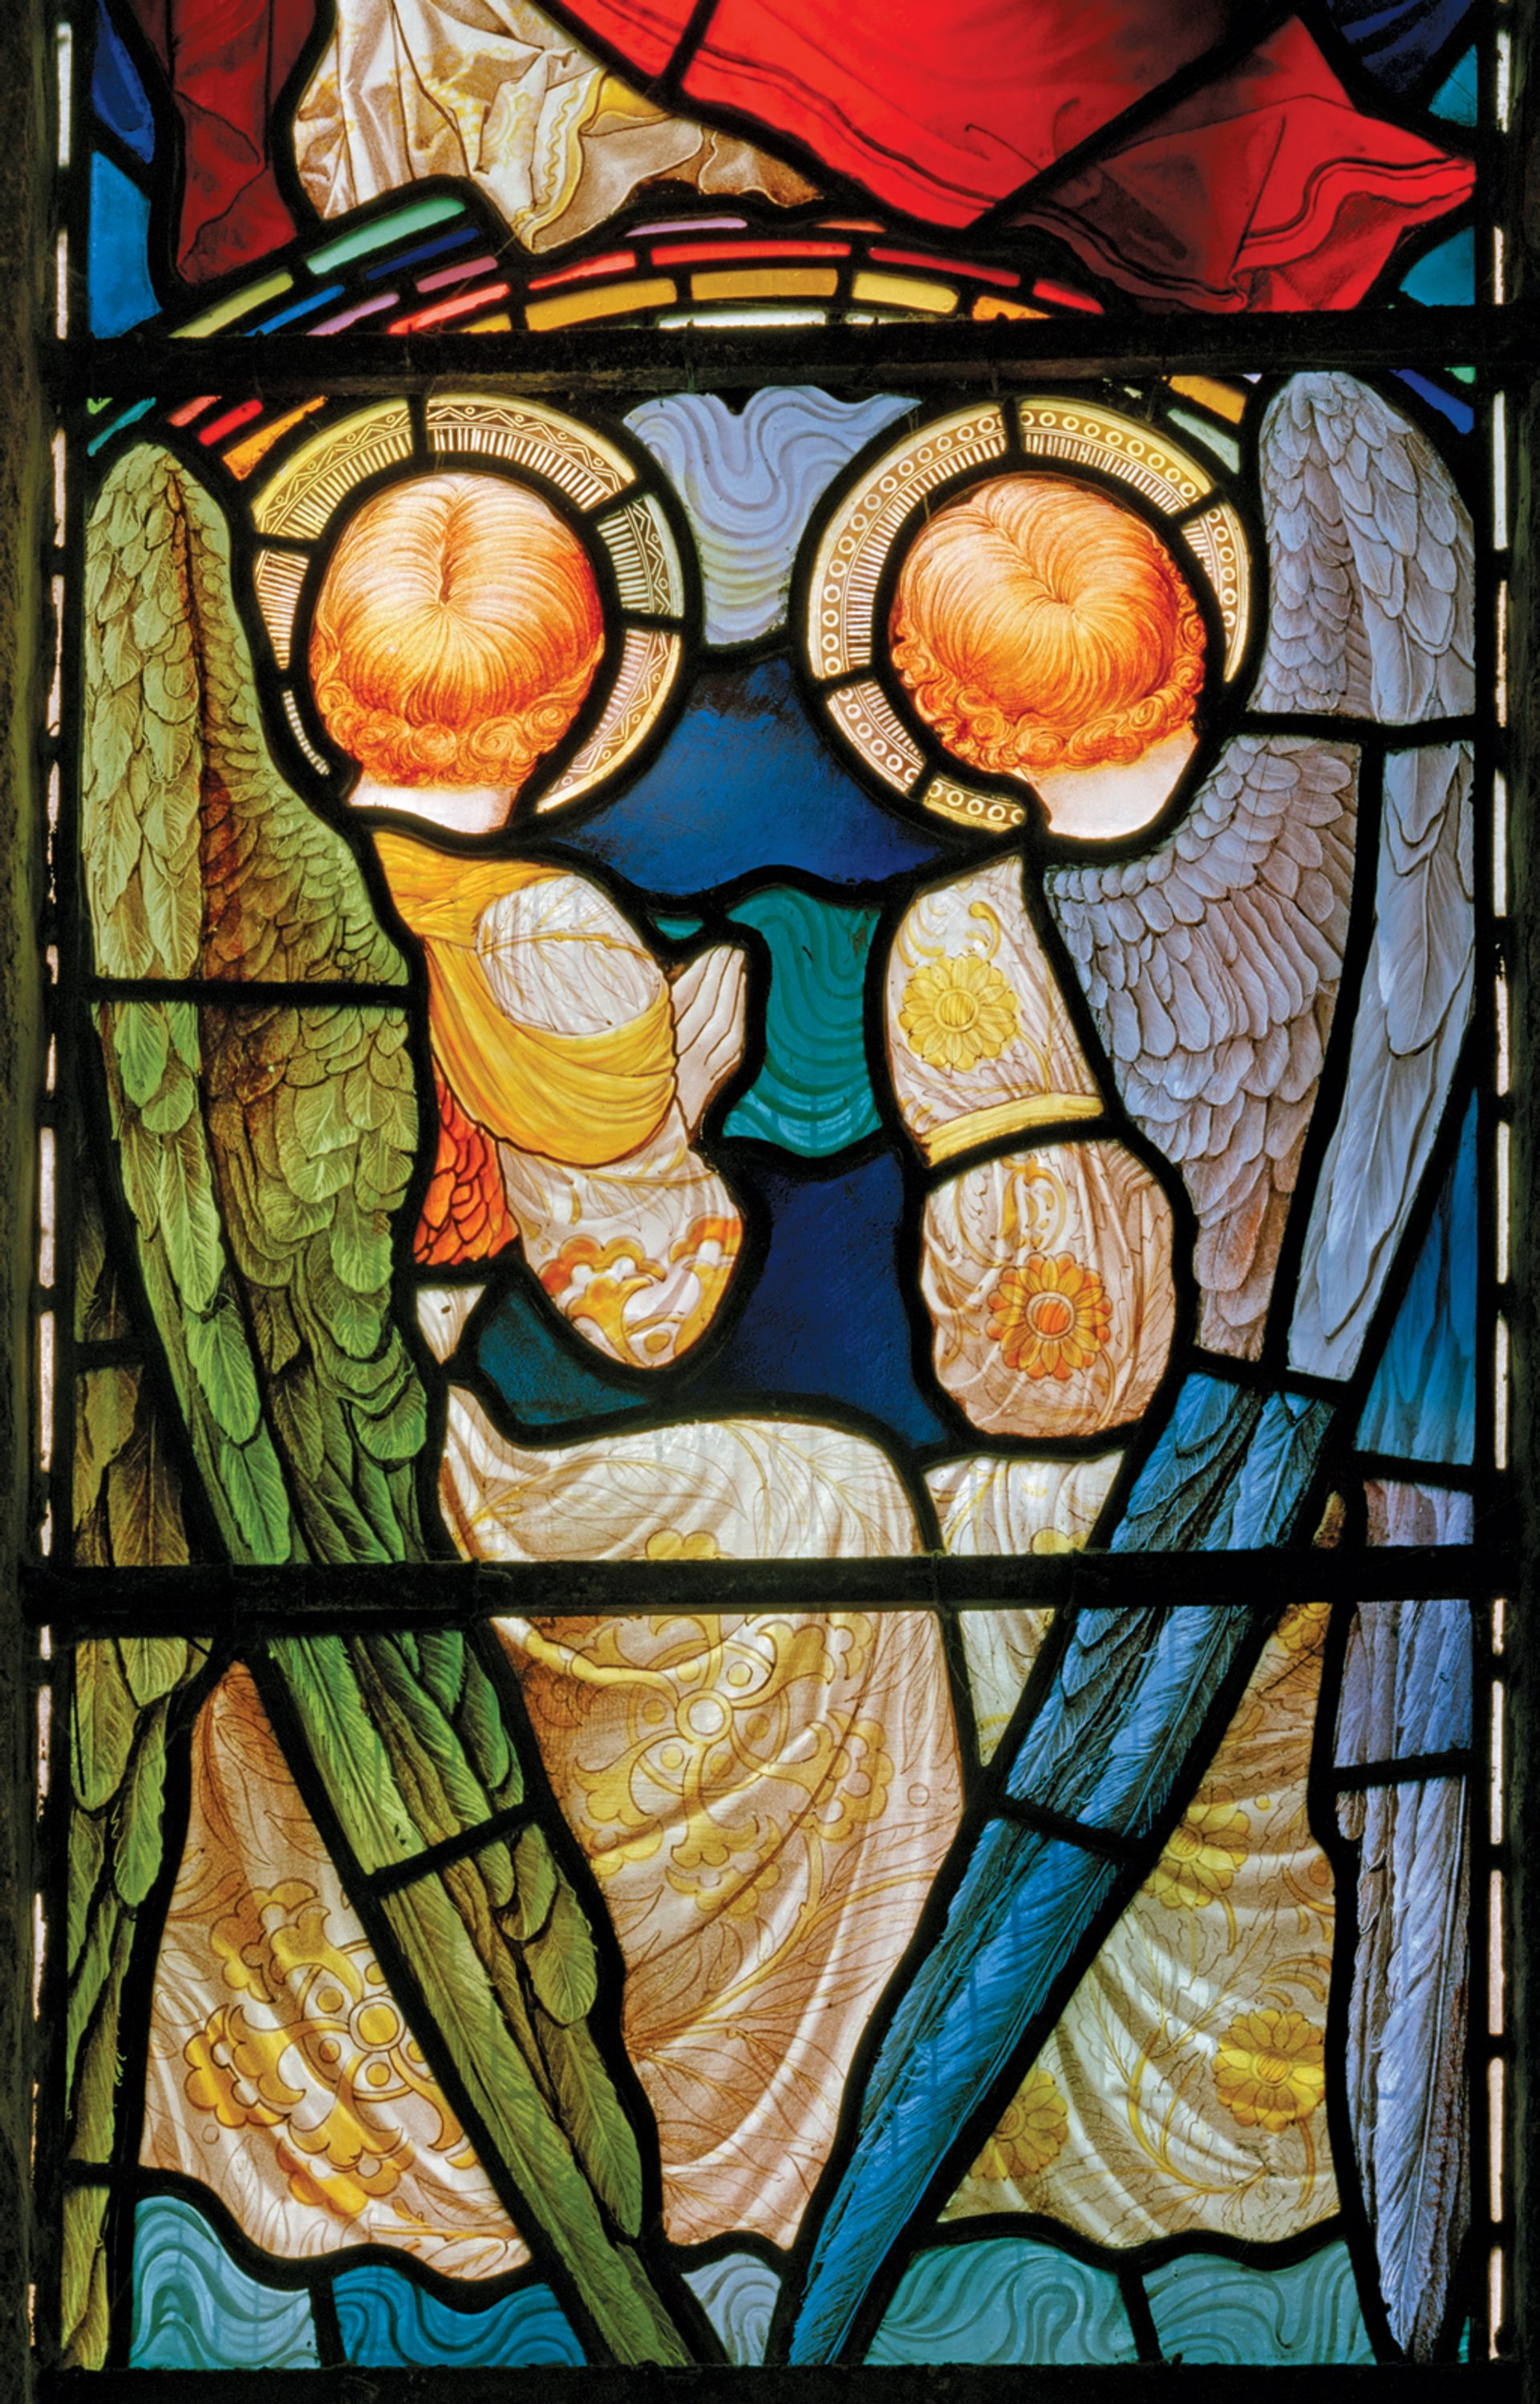 Typically fine: detail from Te Deum window, St Mary and All Saints, Plymstock, Devon, by J.W. Brown for Fouracre & Watson (around 1888) Courtesy of the artist; Photo: Alastair Carew-Cox